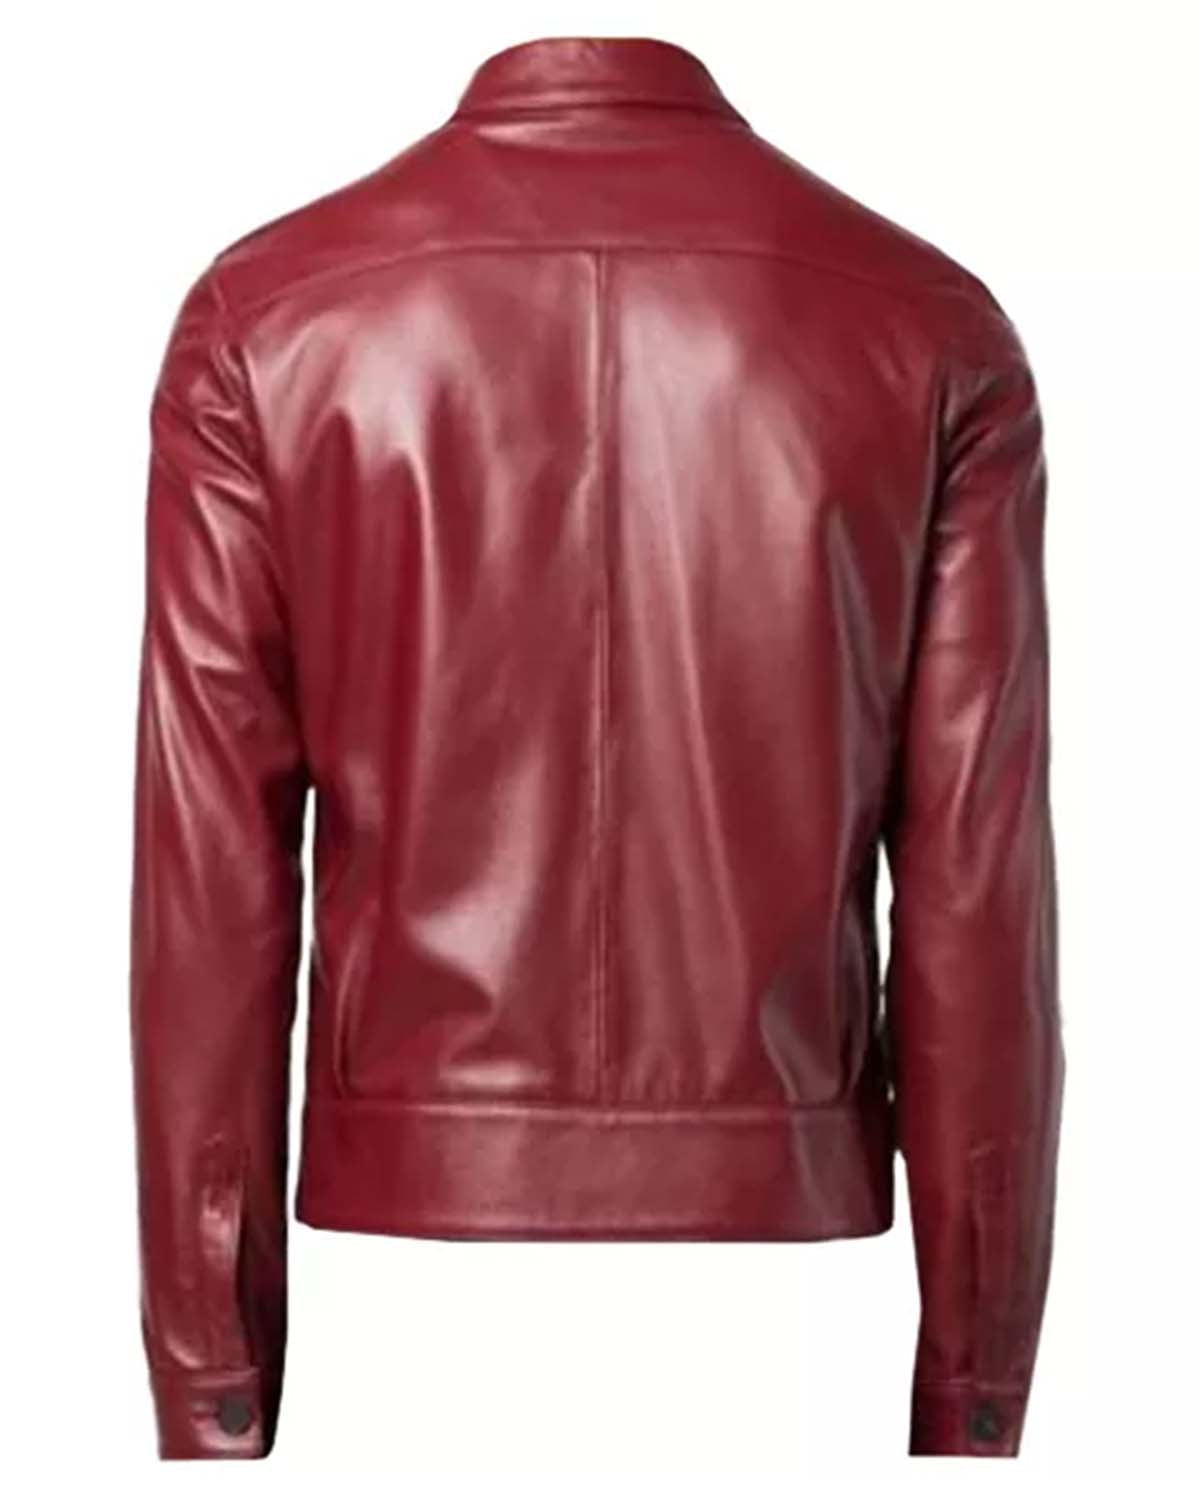 MotorCycleJackets Mens Plain Red Leather Jacket